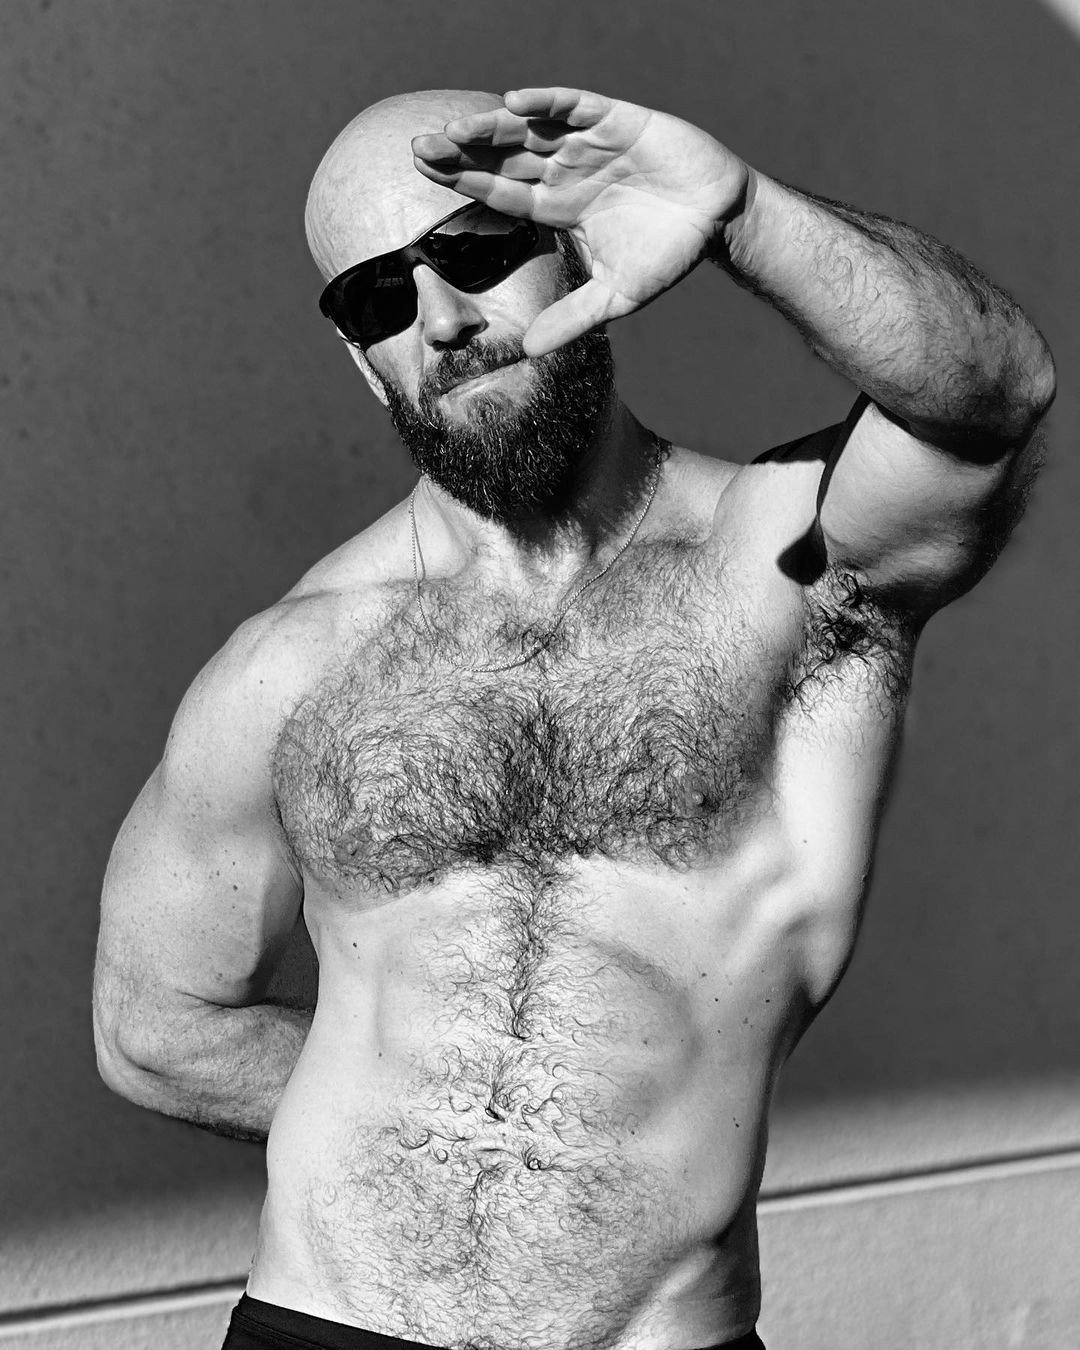 Photo by DirtyDaddyFunStuff with the username @DirtyDaddyPorn, who is a verified user,  April 22, 2024 at 10:30 PM and the text says 'Hot Mix 23 #hairy #otters #bald #bears'